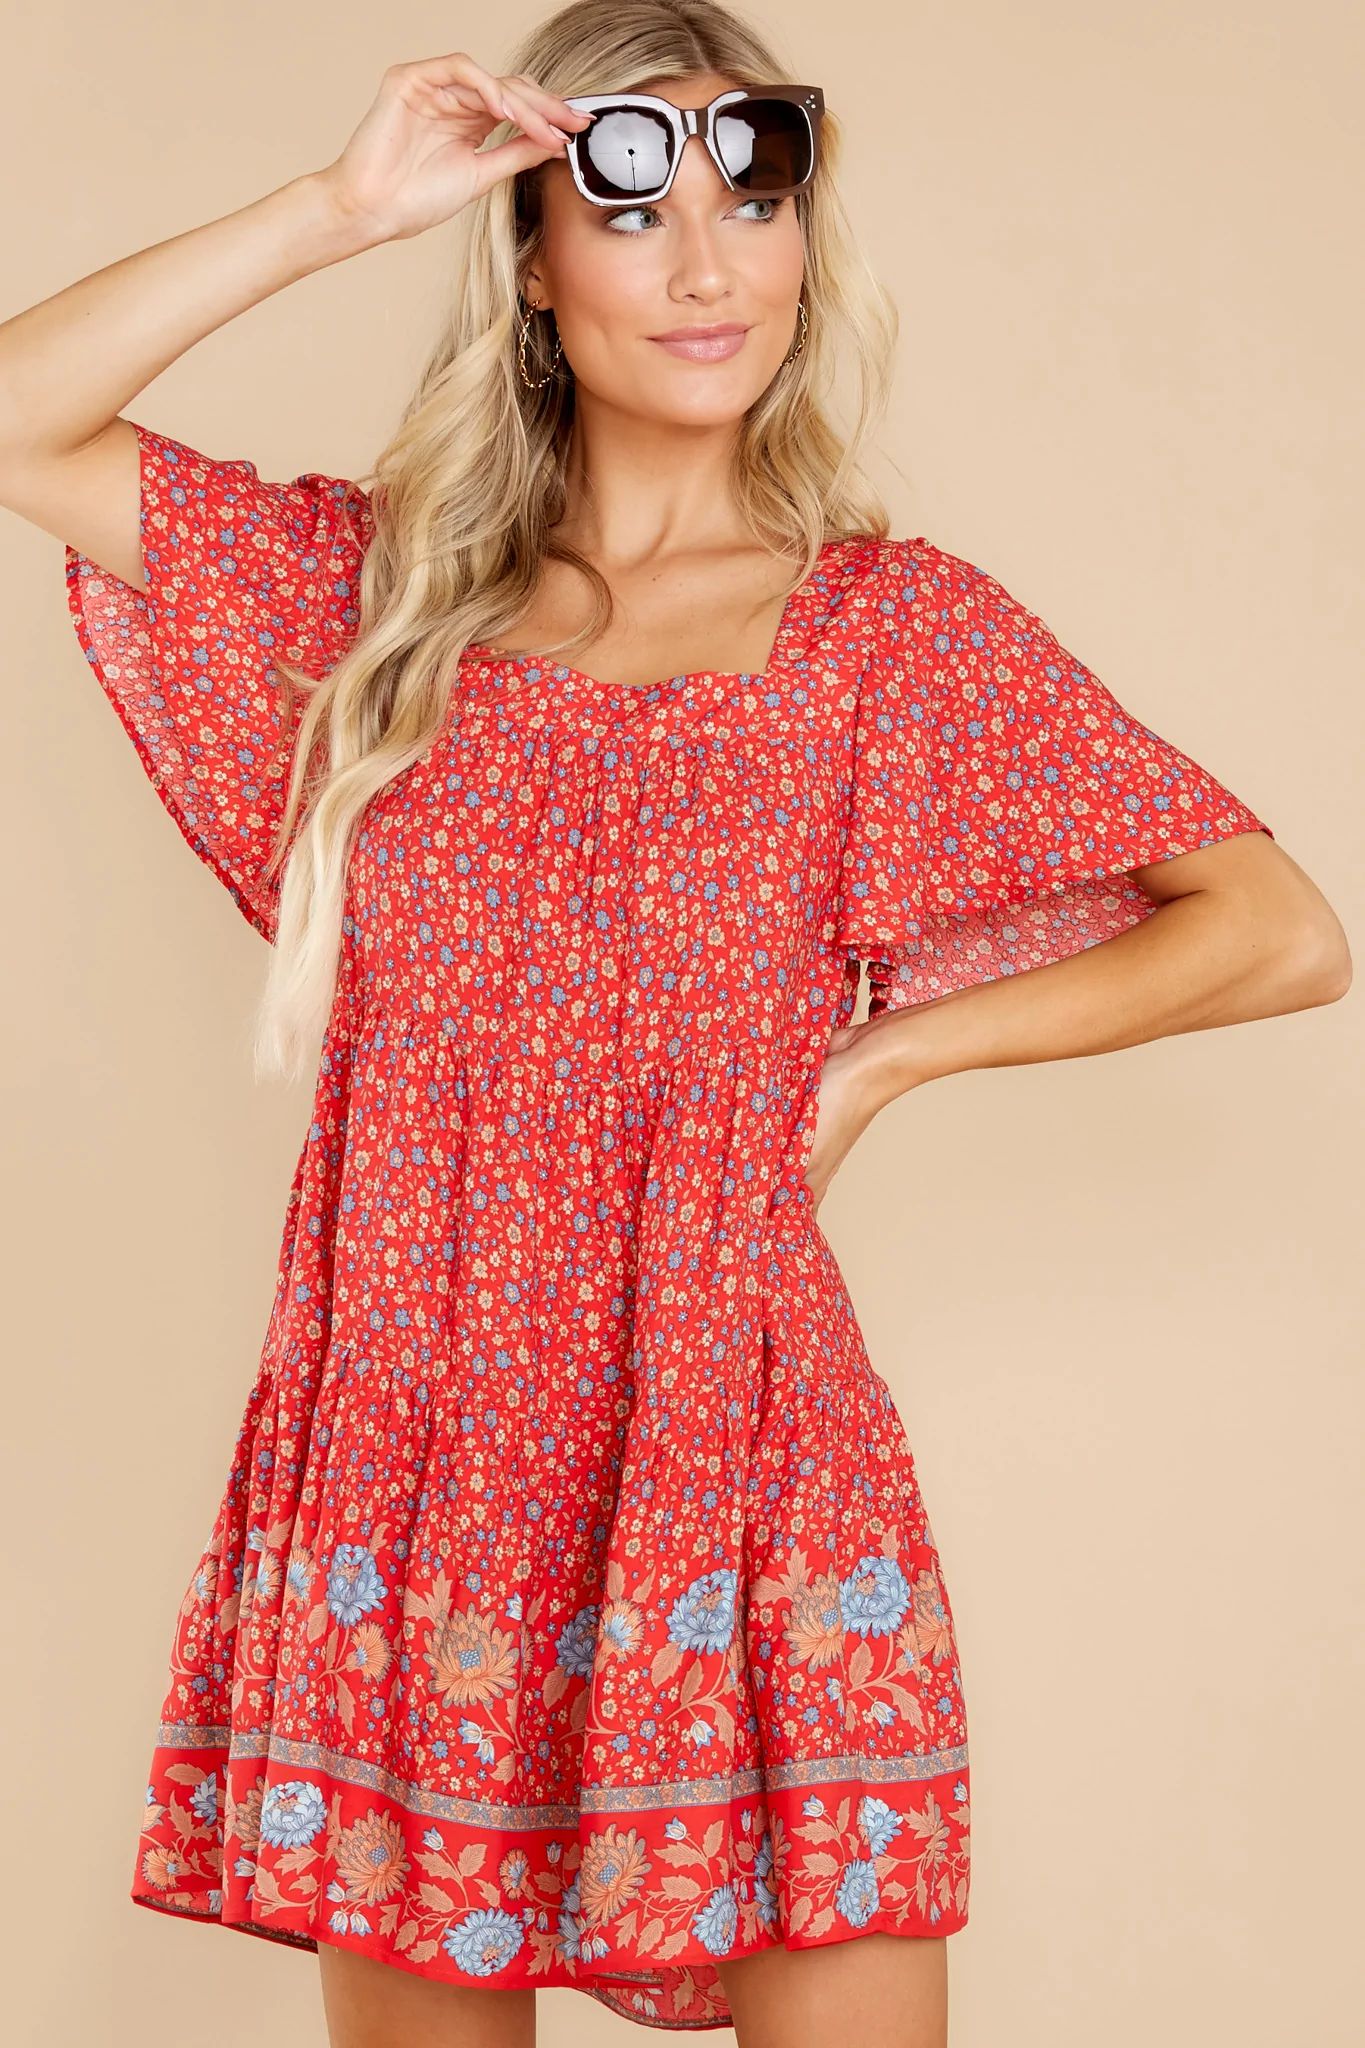 Pleasant Harmony Red Floral Print Dress | Red Dress 